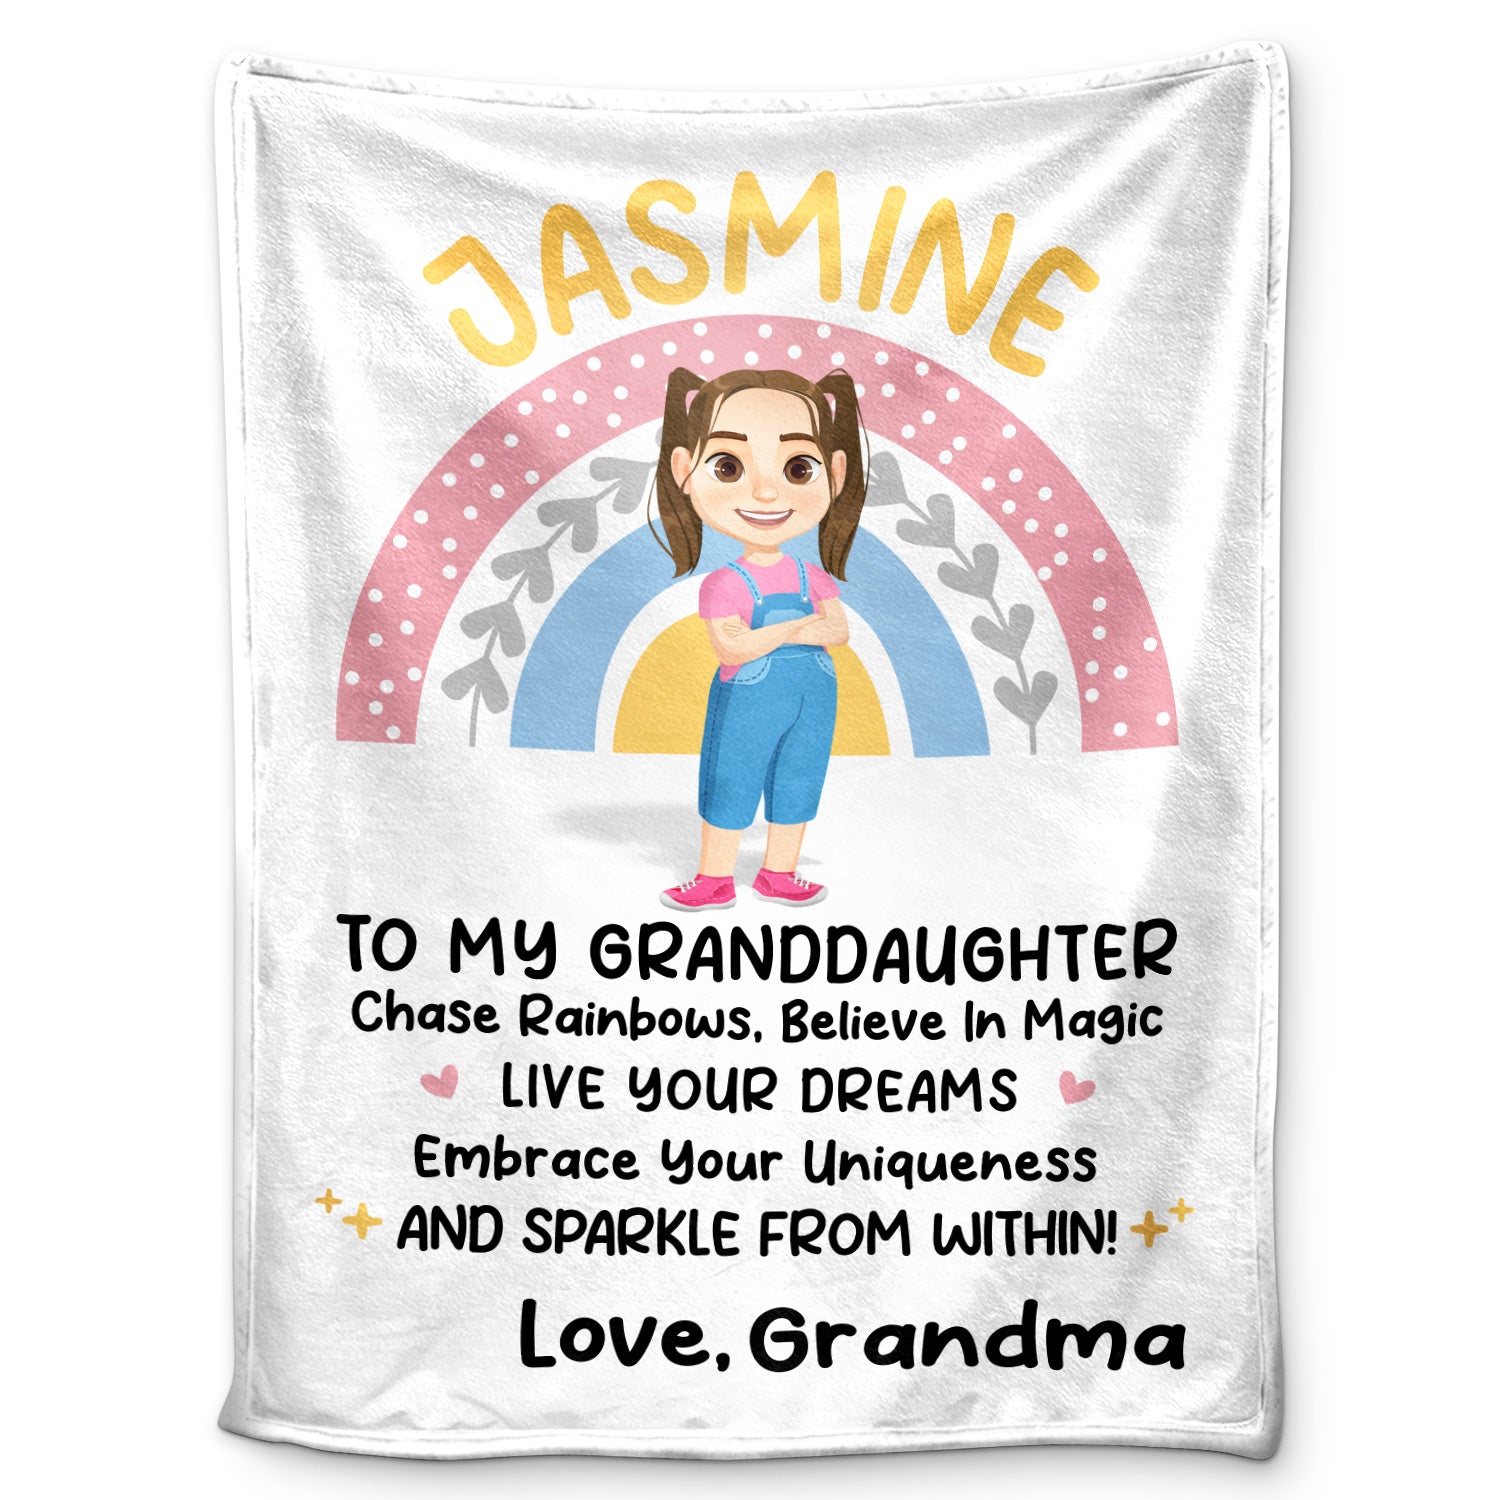 Chase Your Rainbows - Gift For Grandkids From Grandma - Personalized Fleece Blanket, Sherpa Blanket